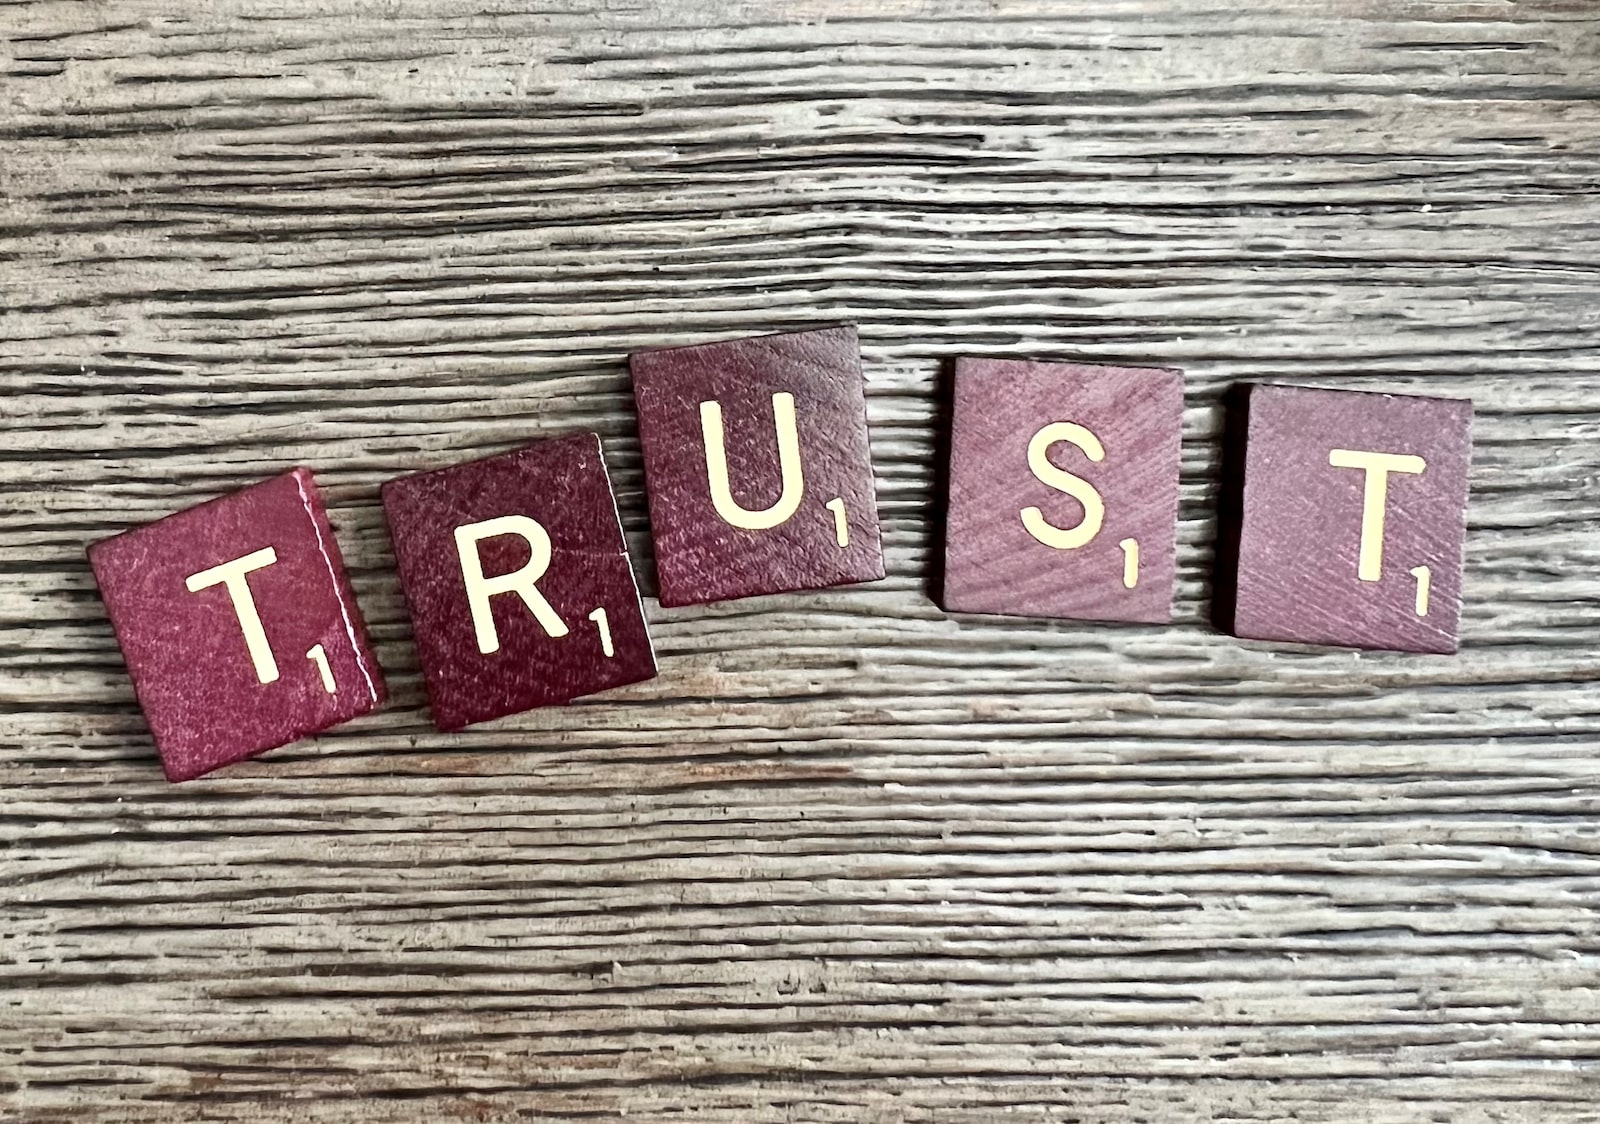 Why Building Trust in God and Each Other Is Crucial for Hospitality